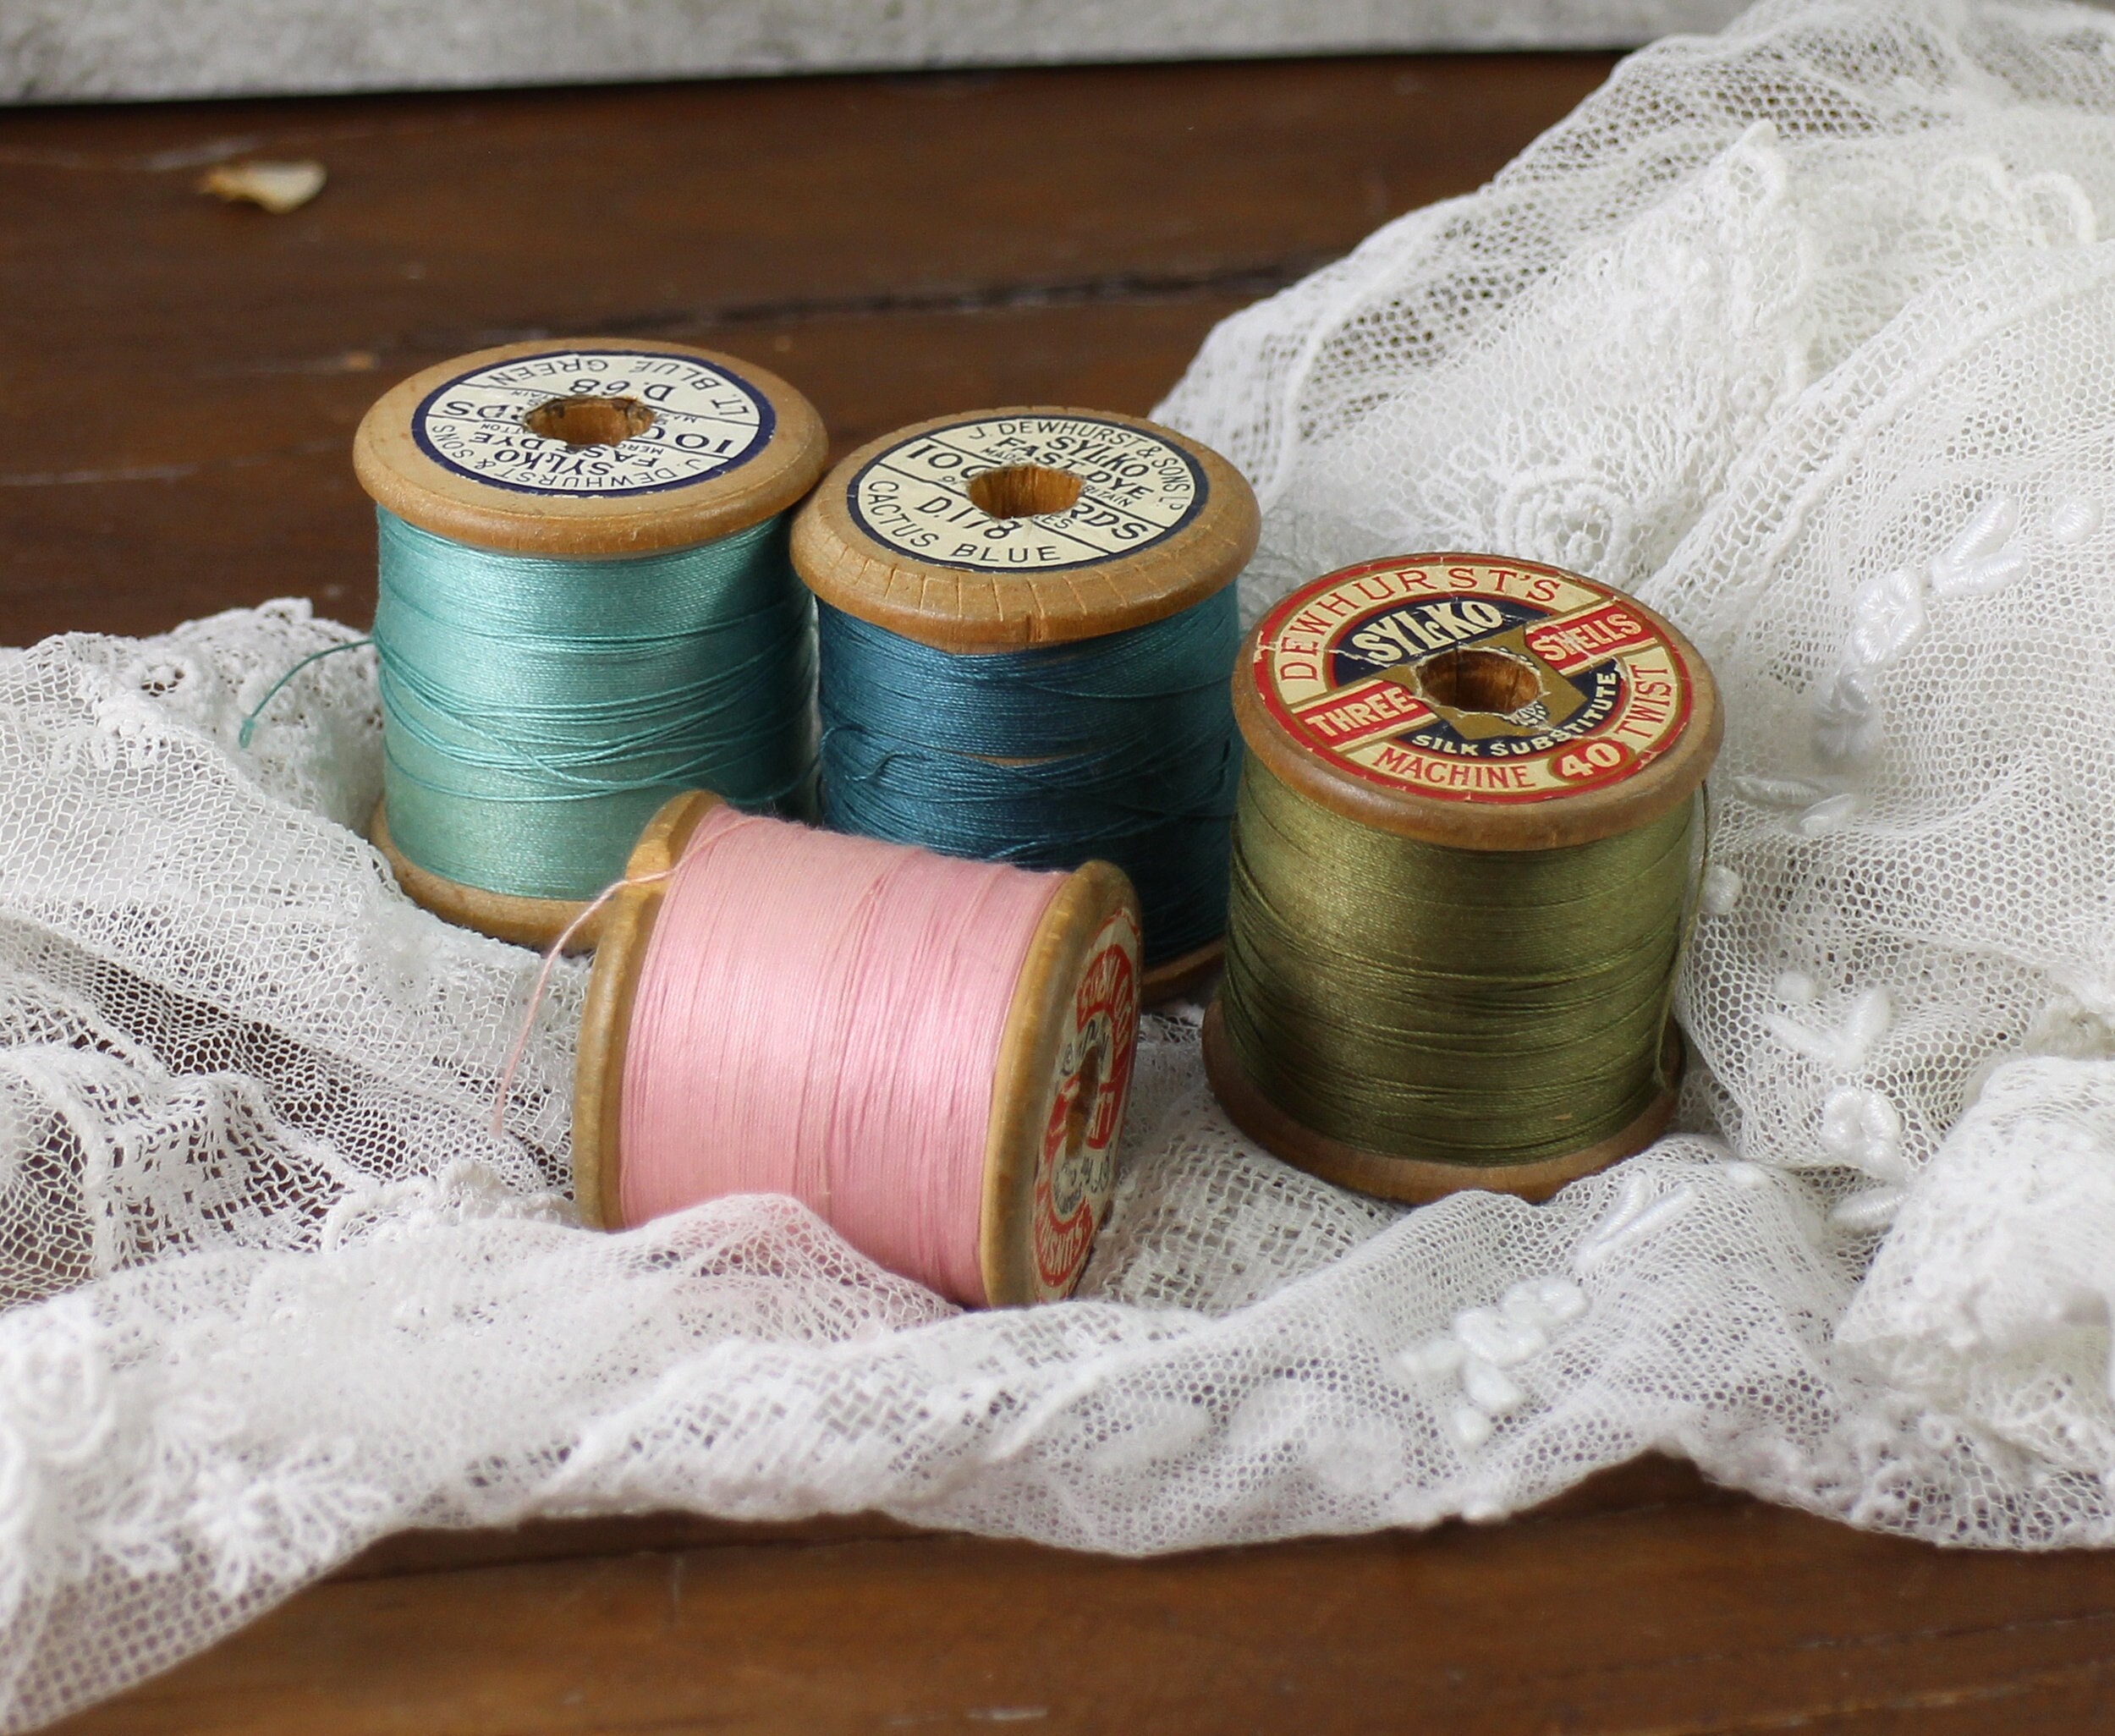 10 Vintage Wooden Spools. Random Selection of Wood Thread Spools in Various  Sizes for Crafts, Farmhouse Decor, Prairie Art 